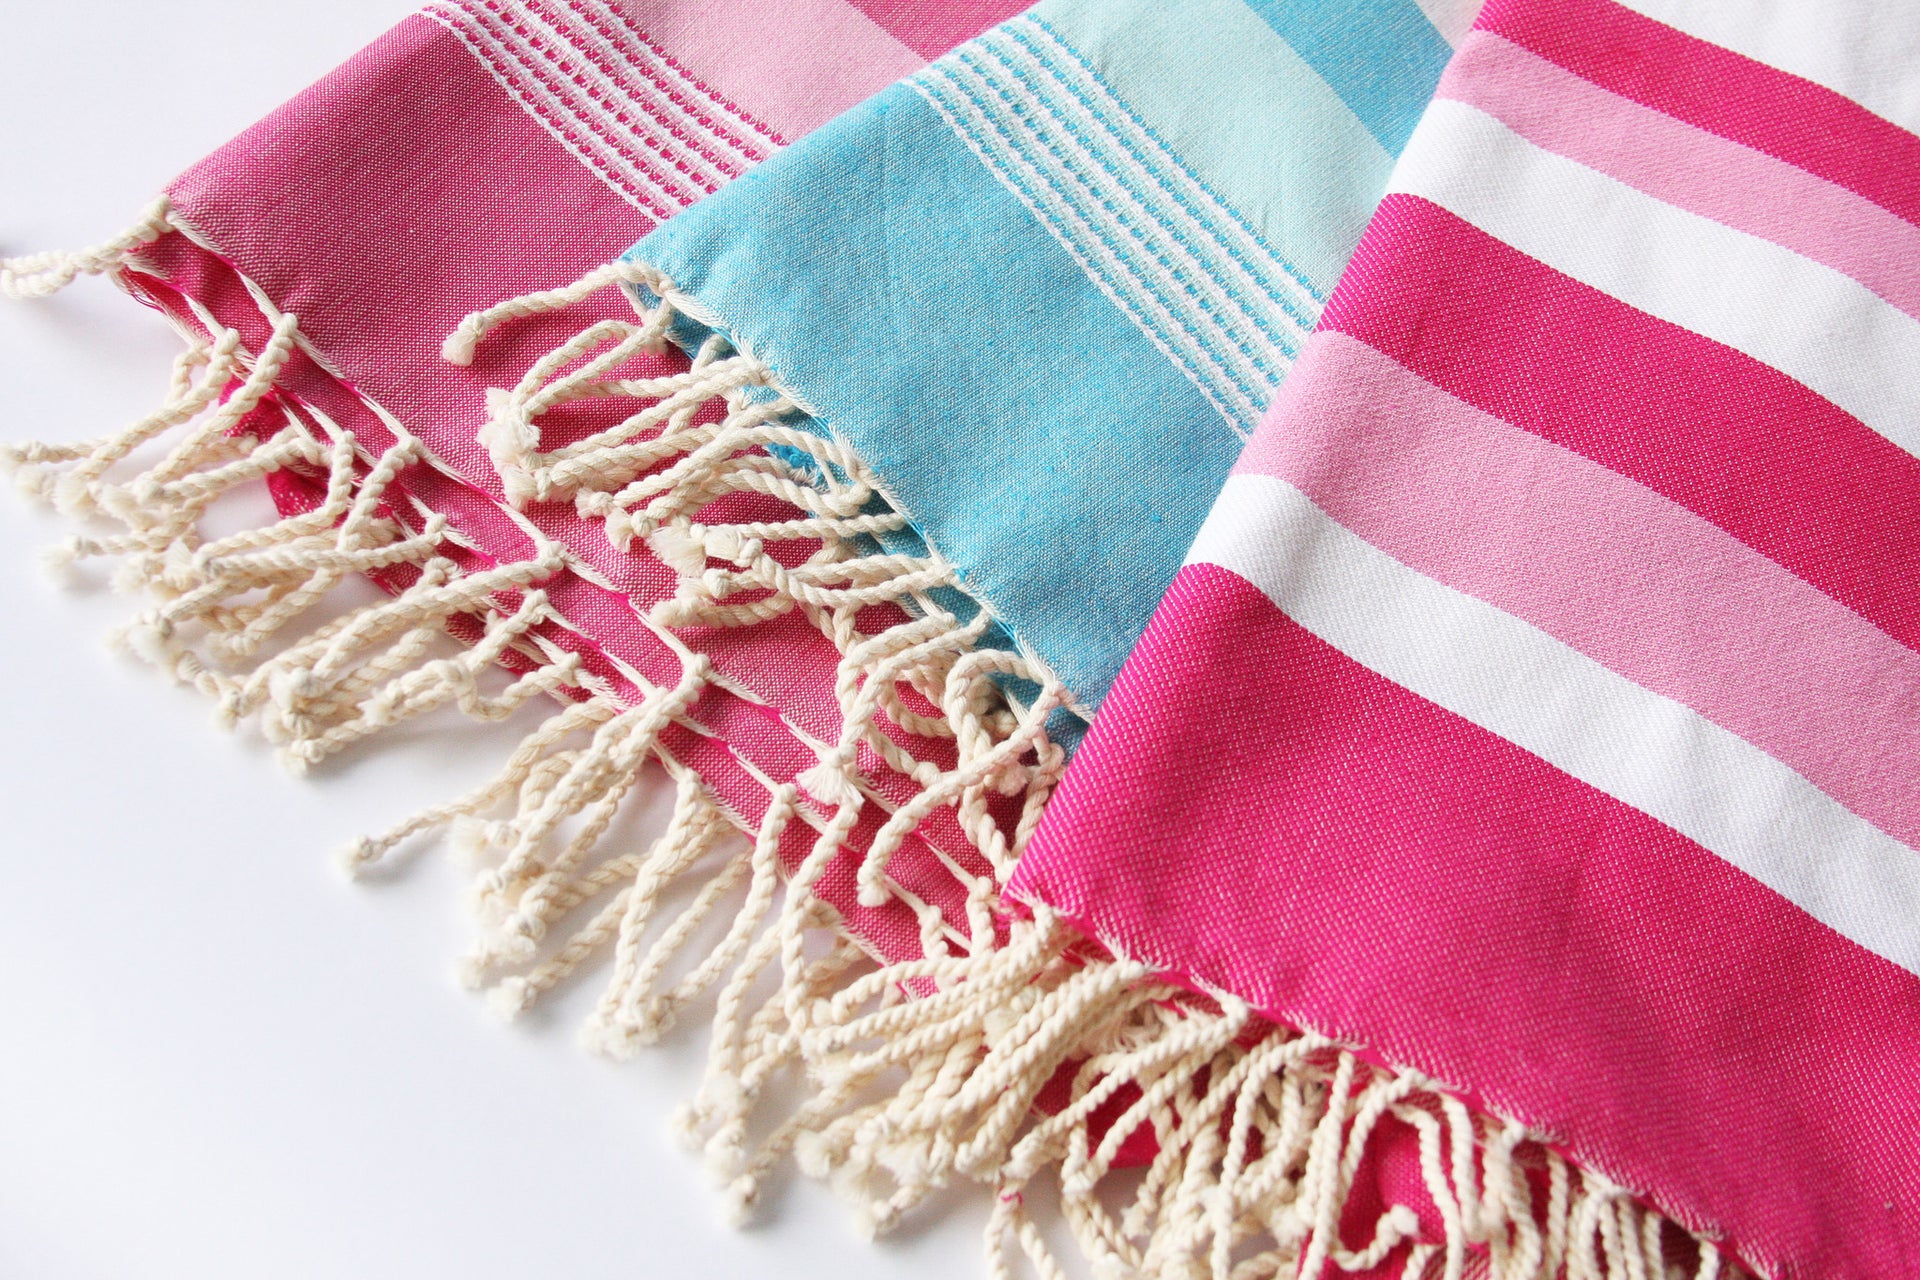 Introducing the Fouta Towel + A Giveaway!!